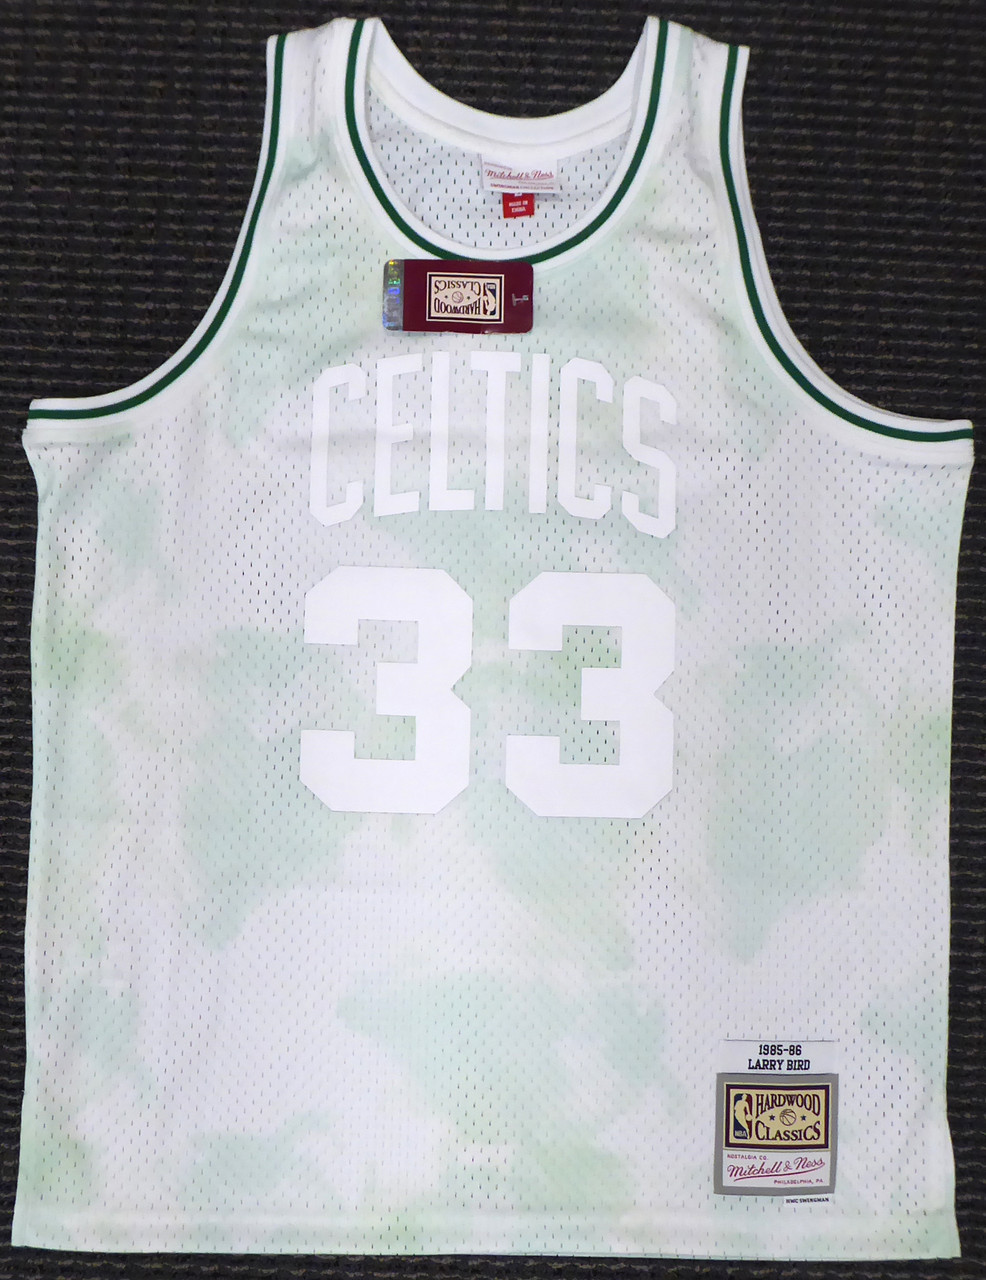 Larry Bird Signed Jersey - Black Mitchell & Ness Gold Toile